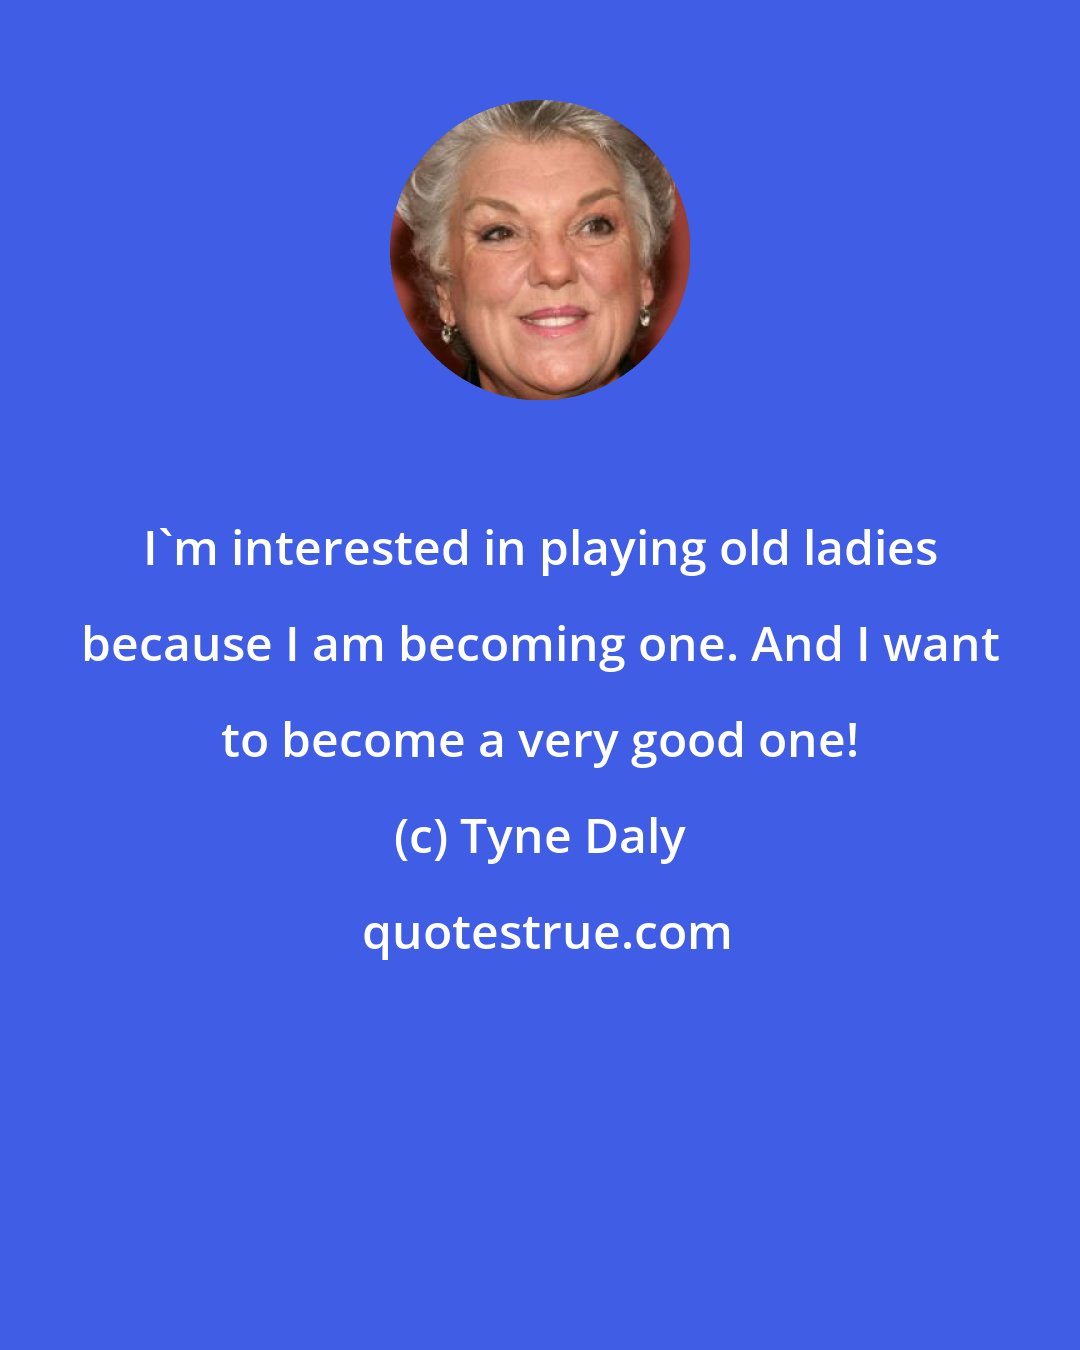 Tyne Daly: I'm interested in playing old ladies because I am becoming one. And I want to become a very good one!